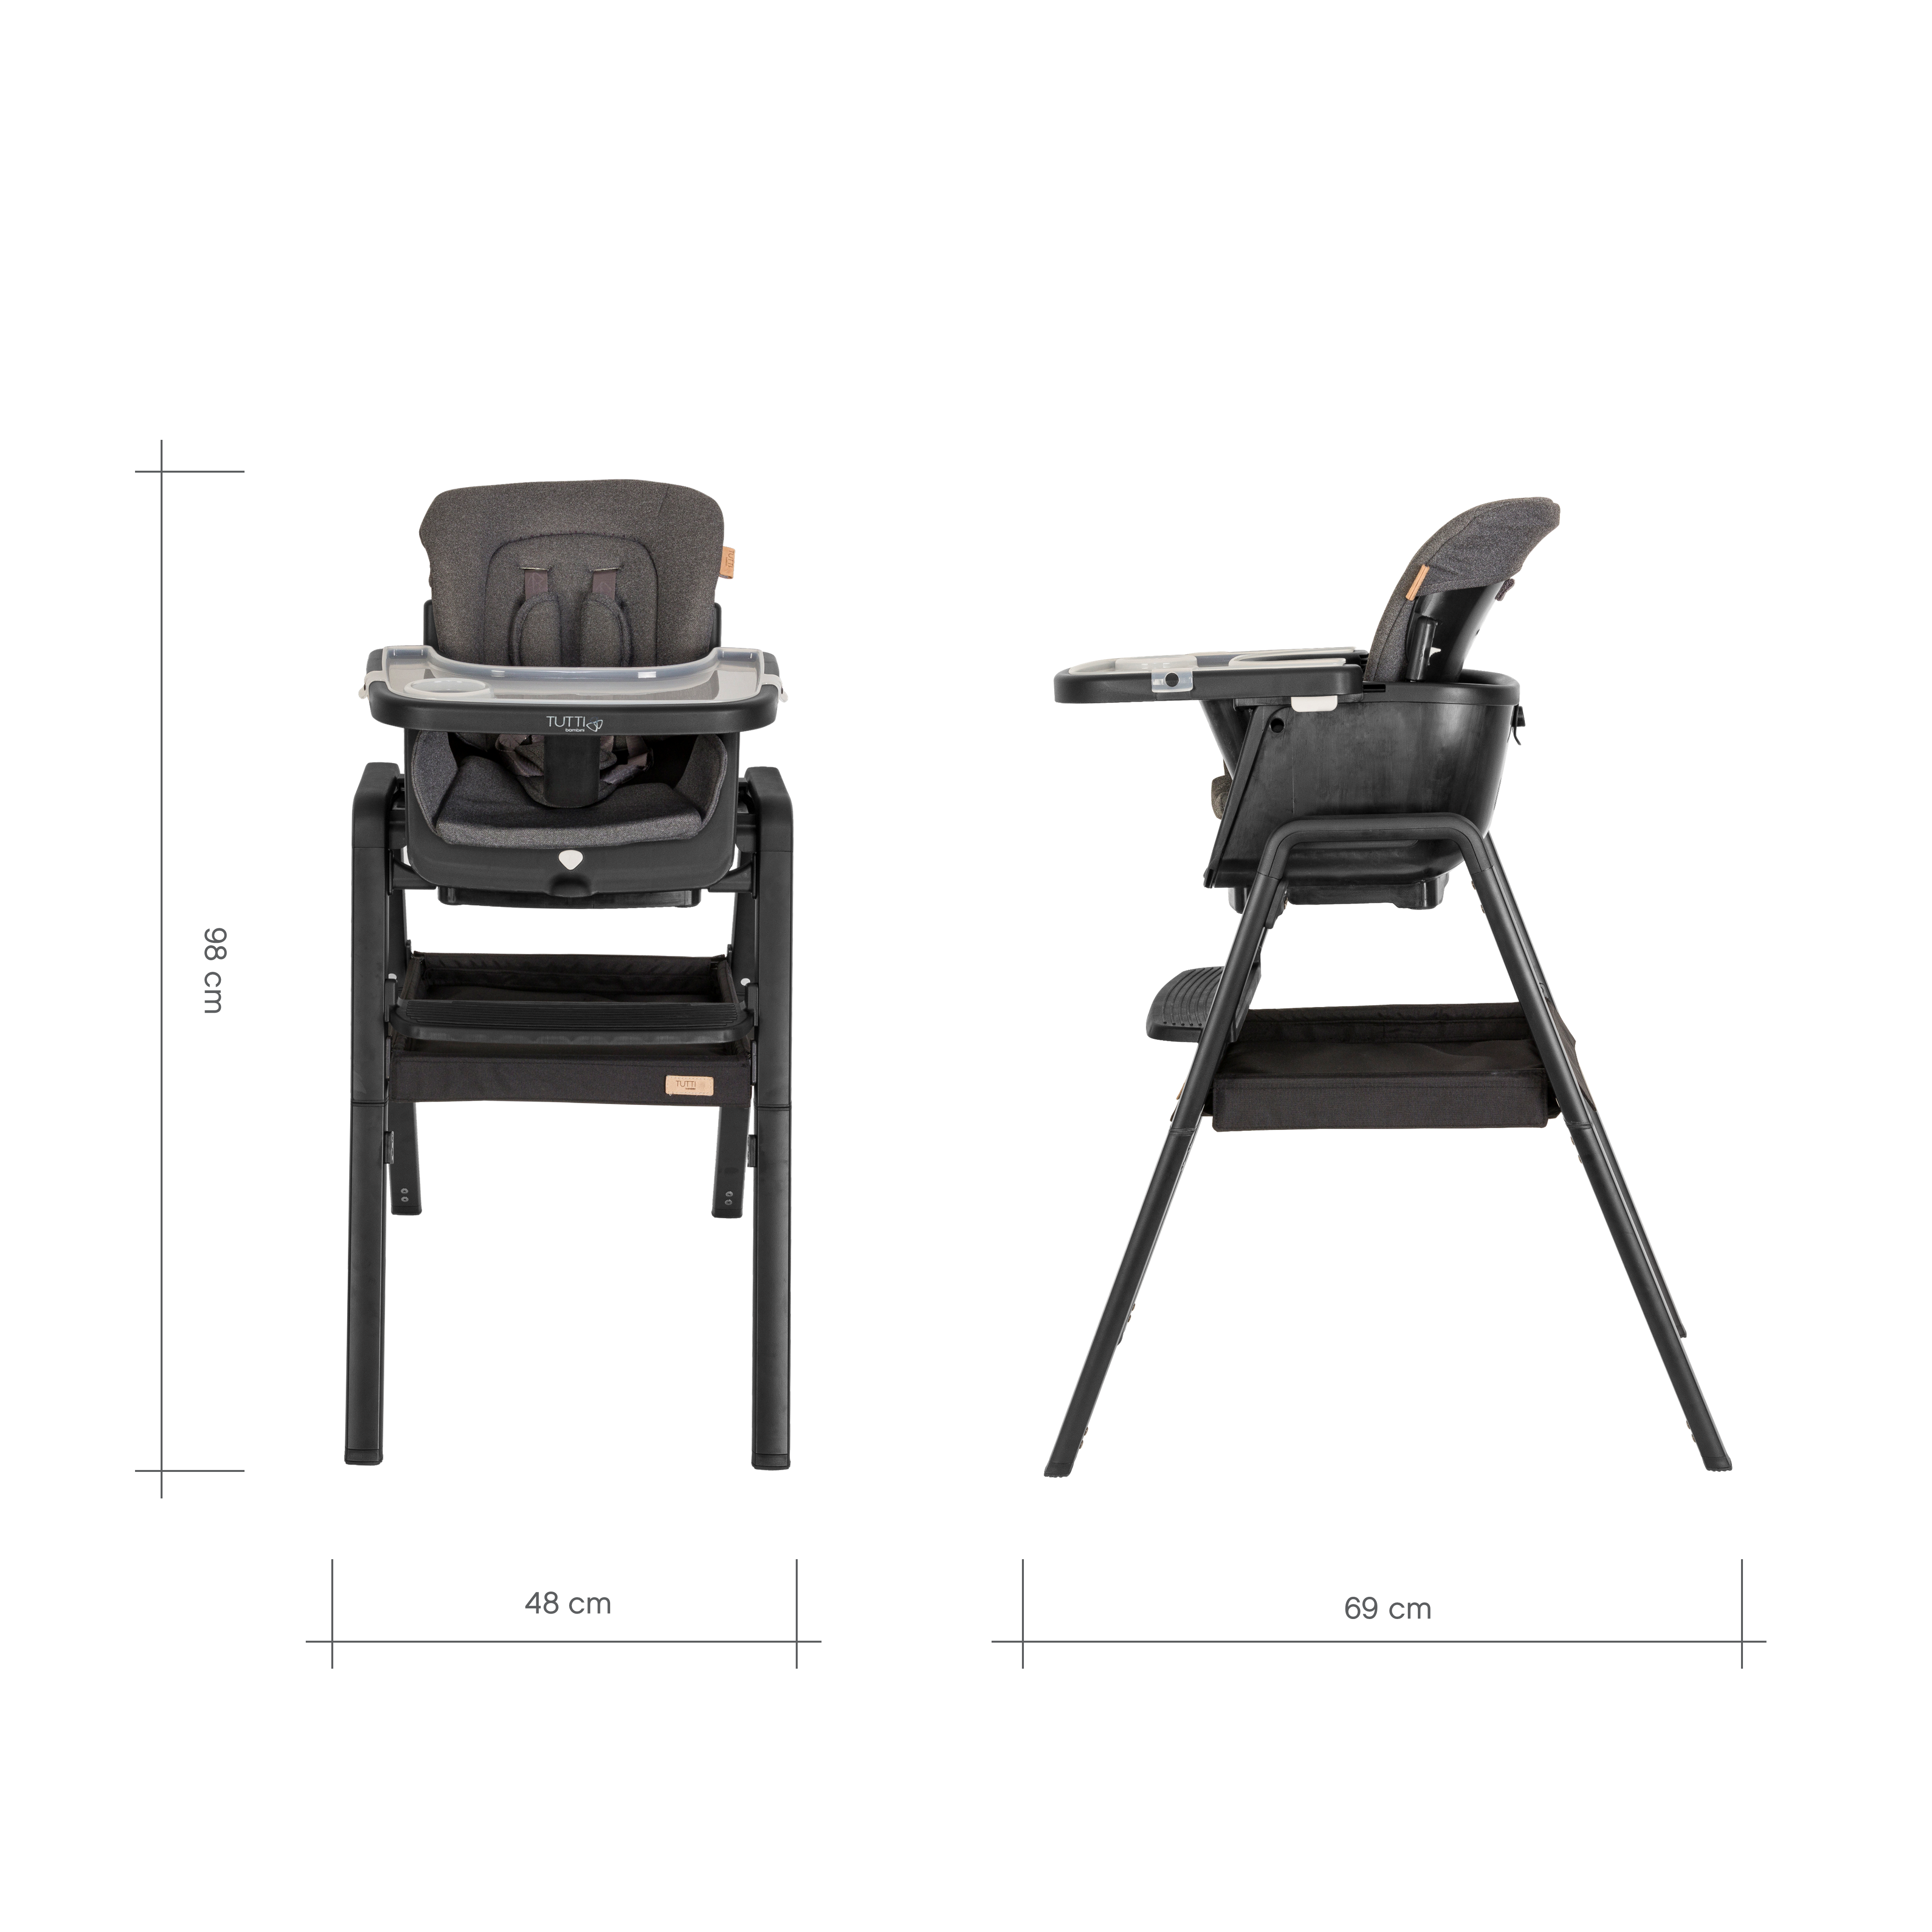 Tutti Bambini Nova Birth to 12 Years Complete Highchair Package - Black/Black - For Your Little One